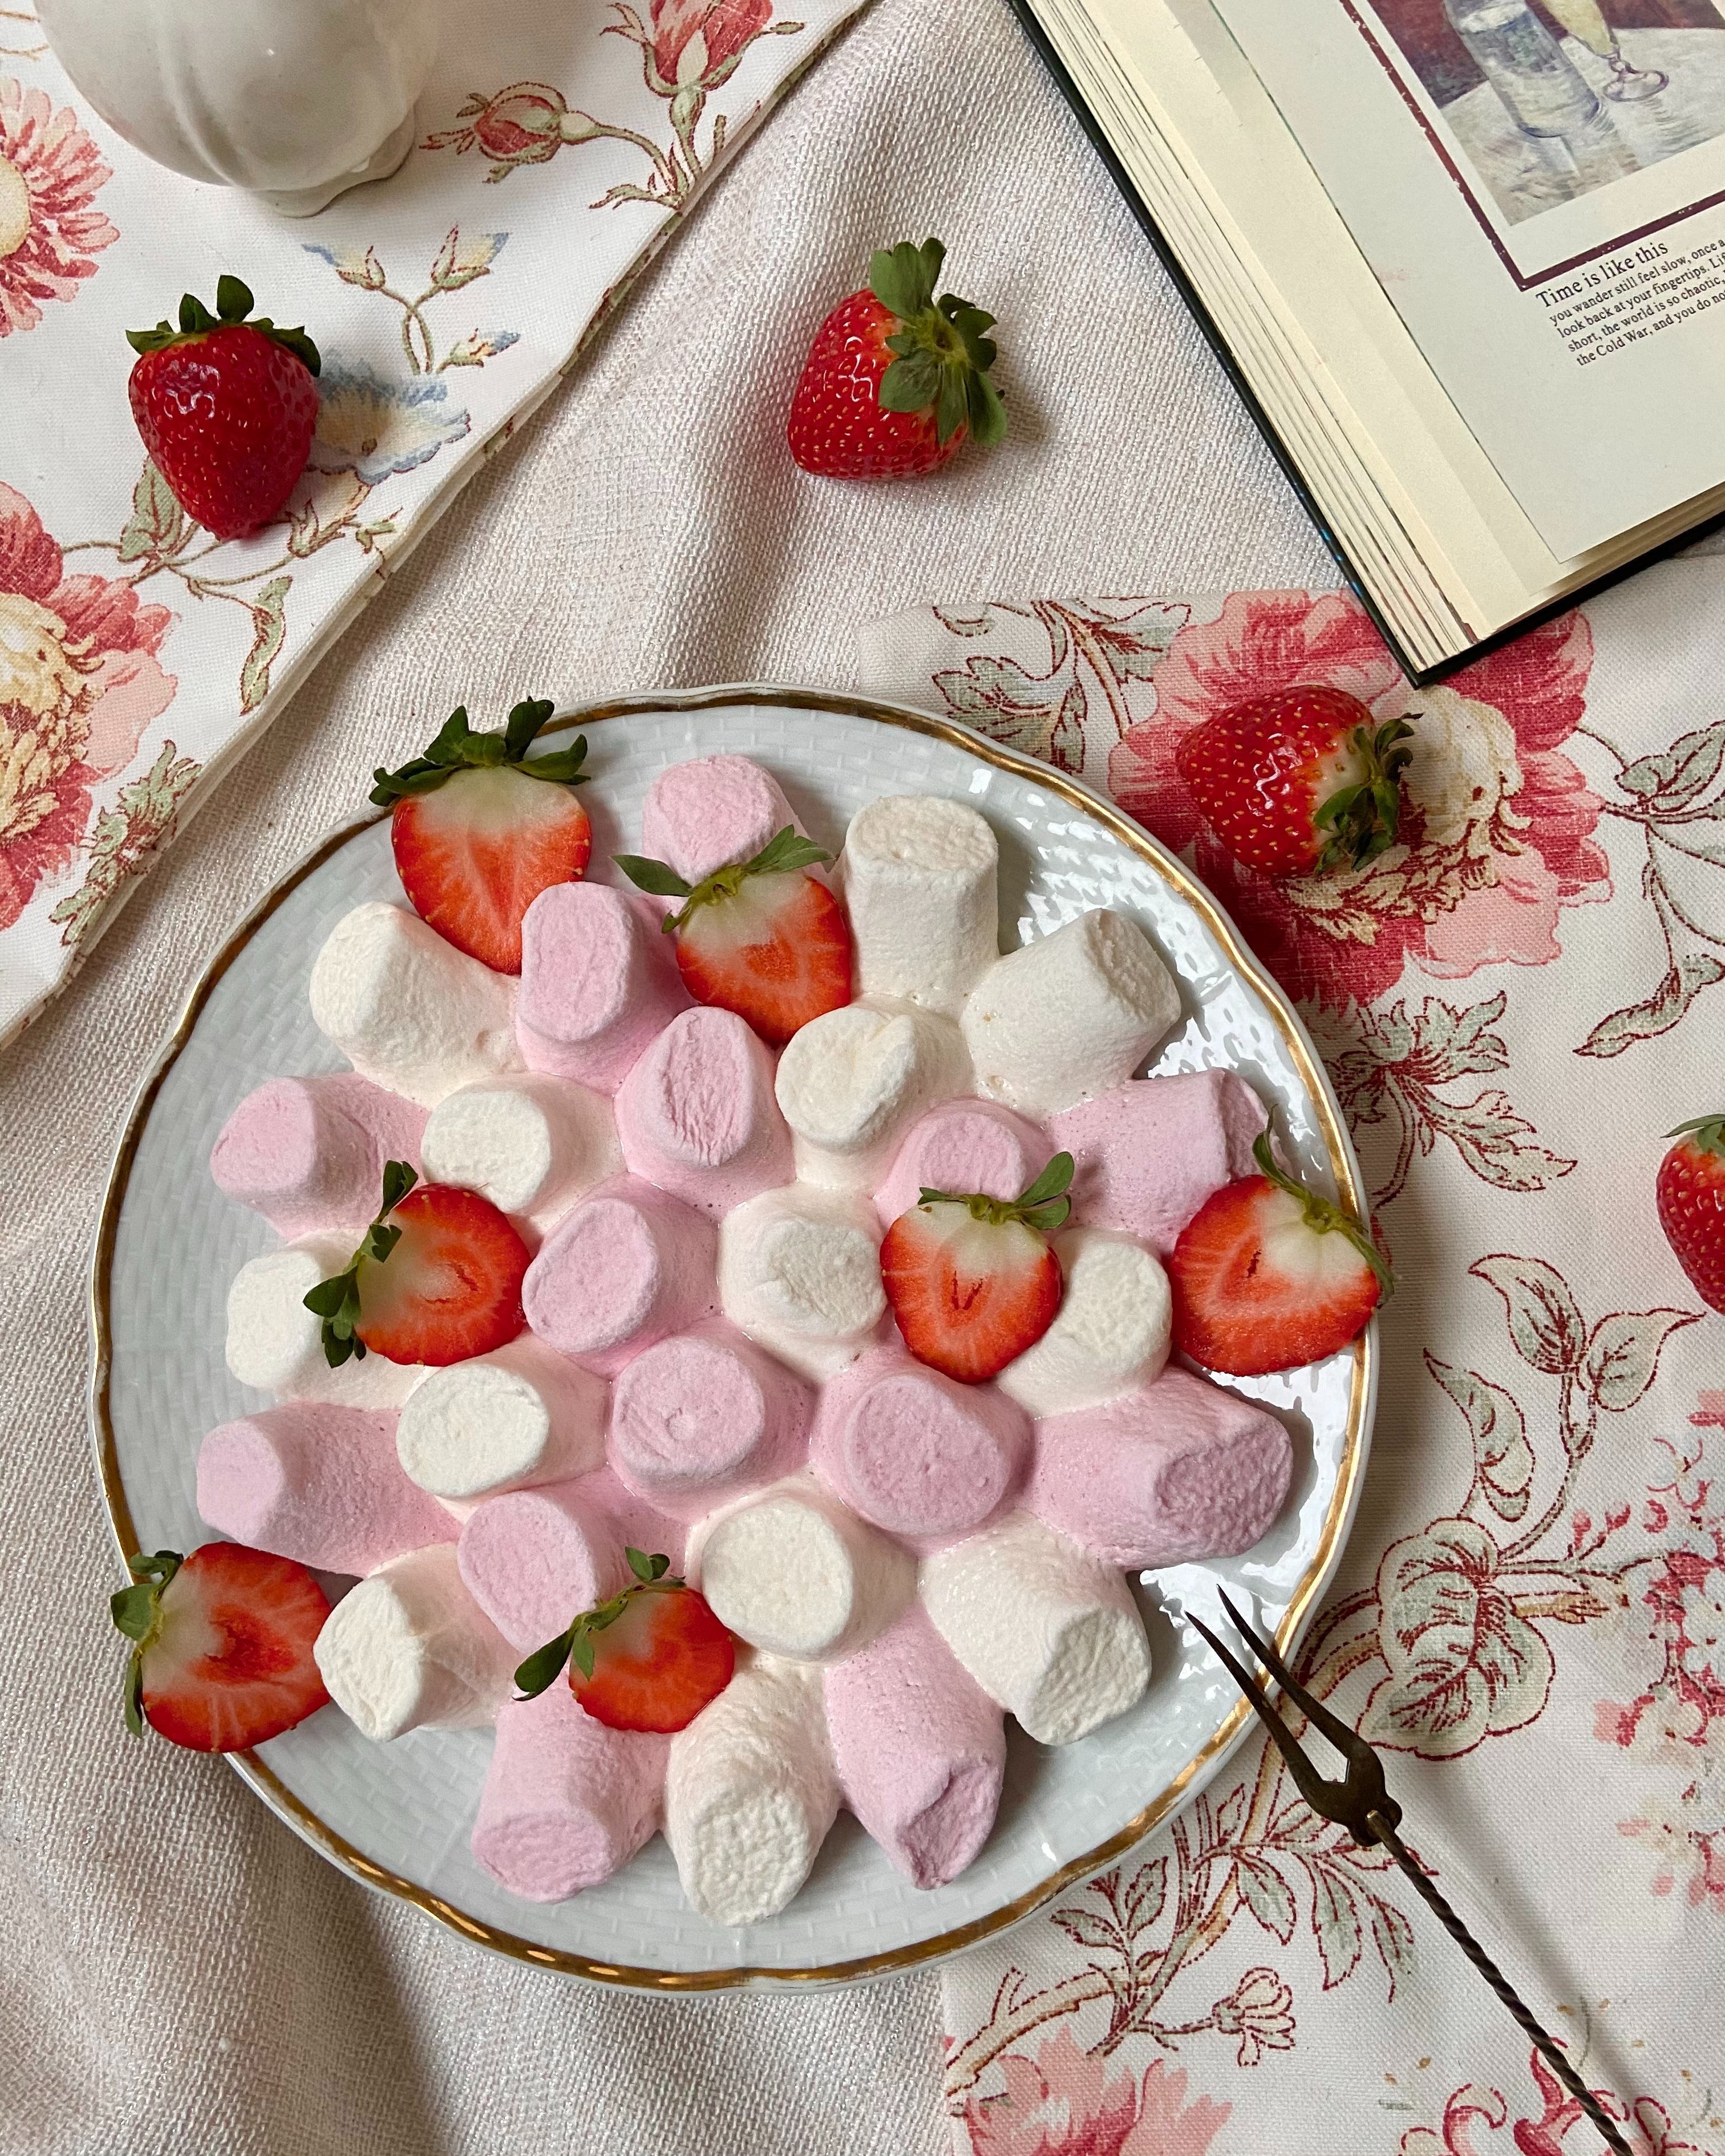 A plate of marshmallows and strawberries on top - Lovecore